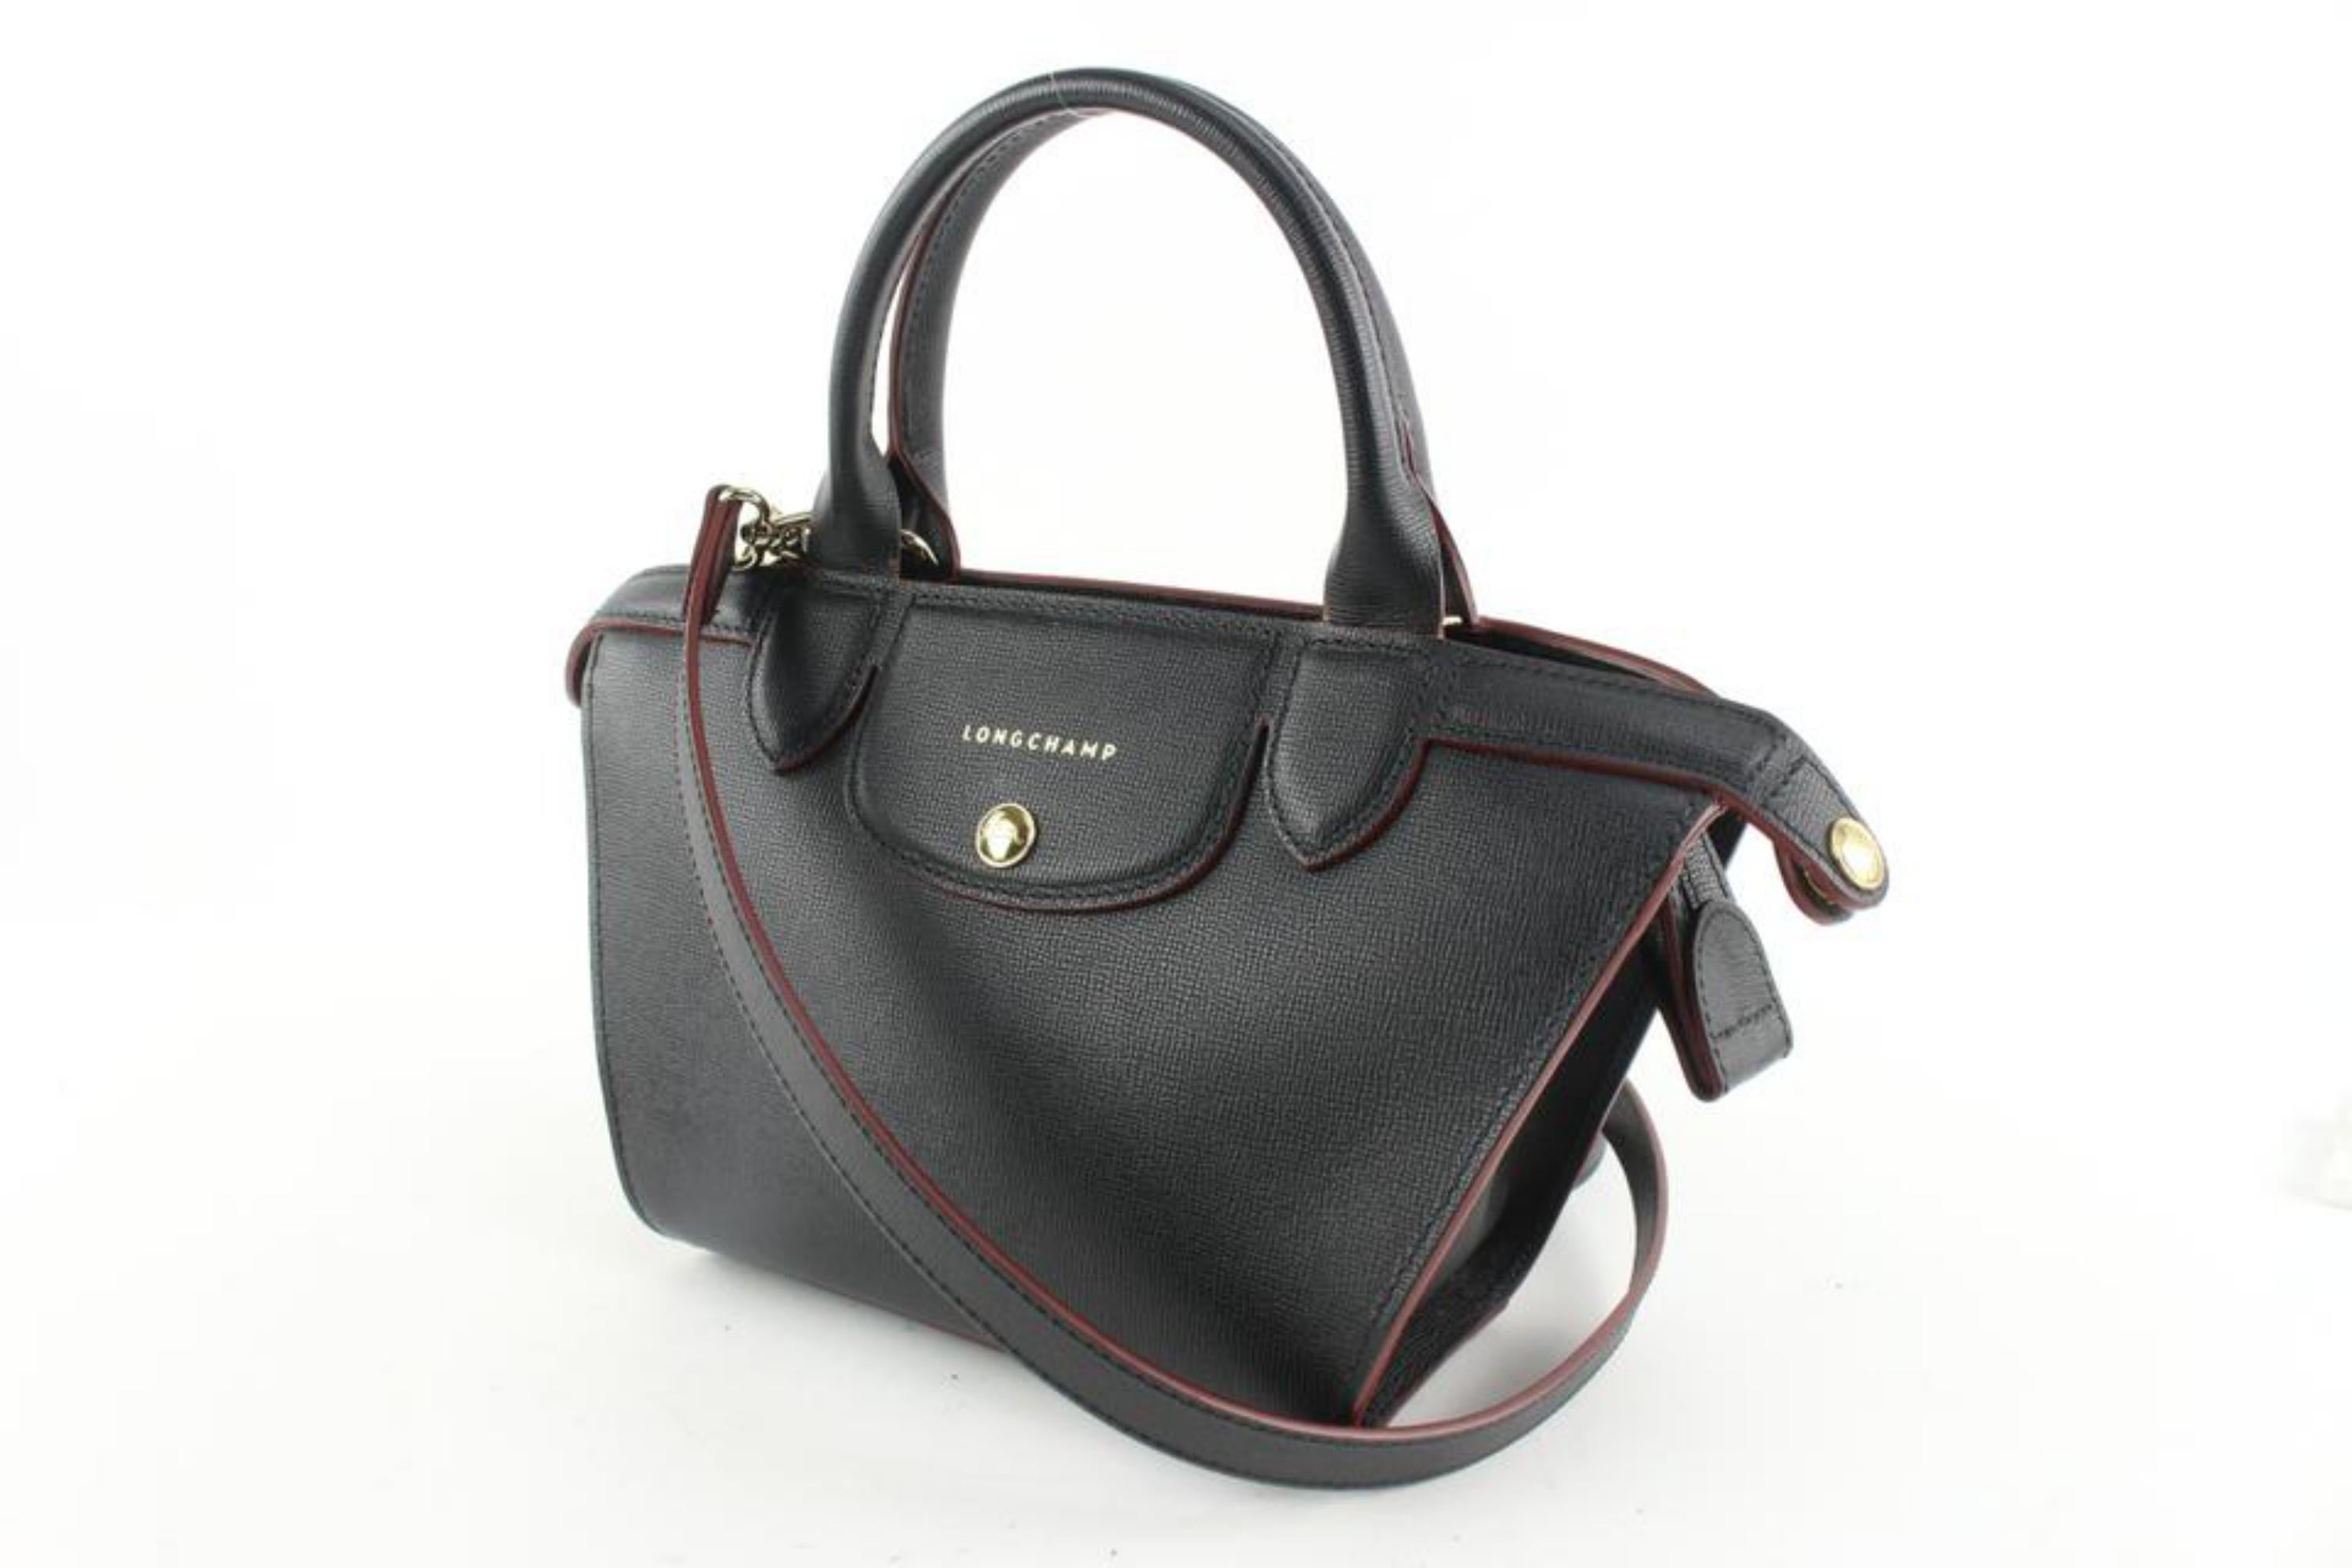 Longchamp Black Leather Extra Small Le Pliage 2way Mini 1224lc25
Date Code/Serial Number: 1001202 1116813001
Made In: France
Measurements: Length:  11